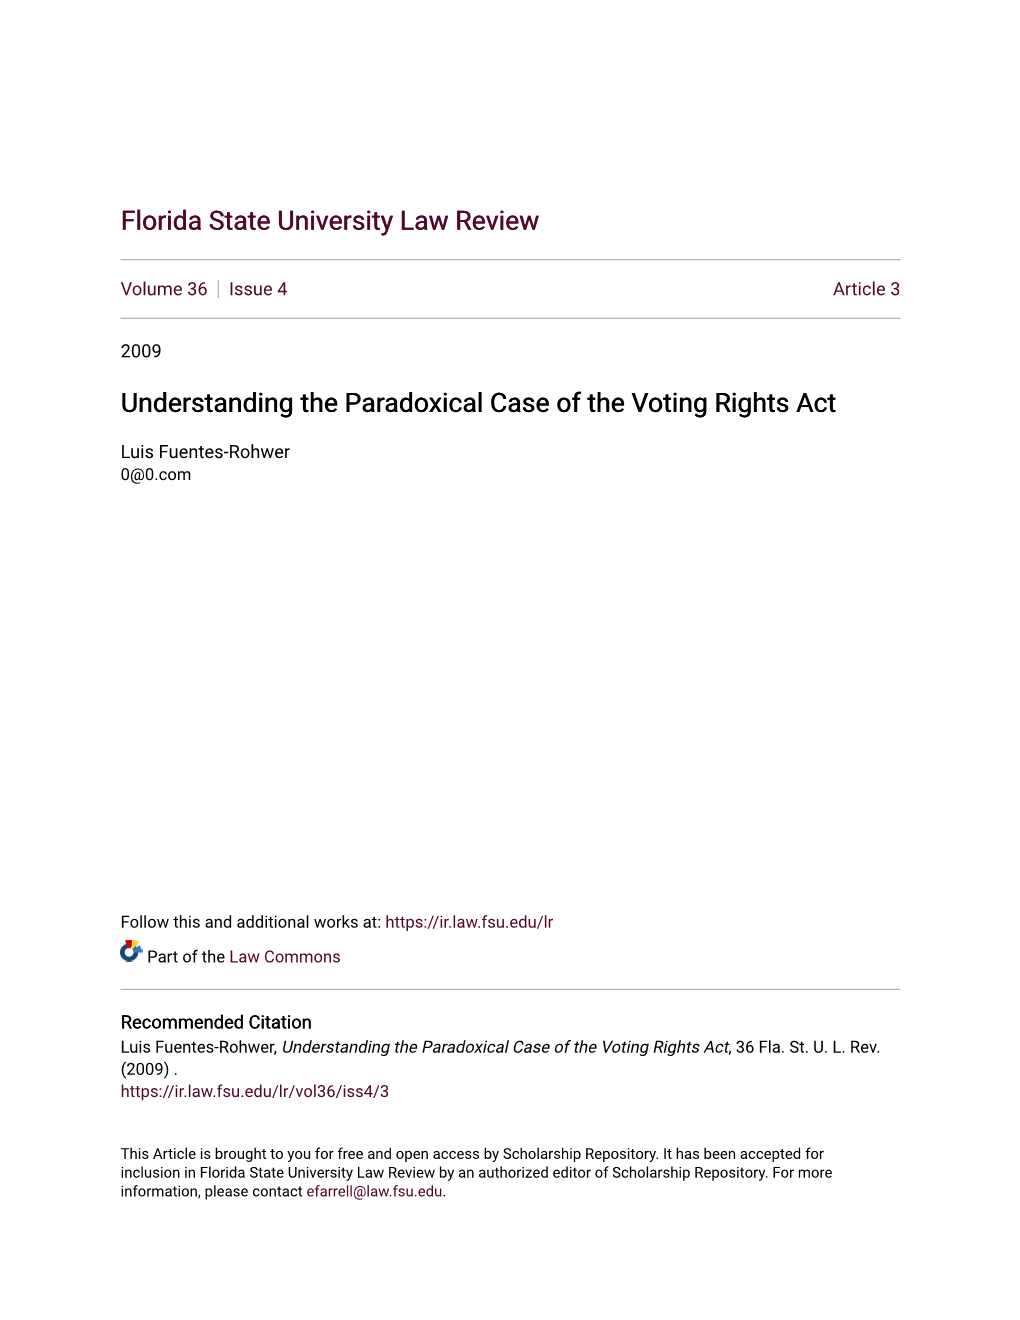 Understanding the Paradoxical Case of the Voting Rights Act